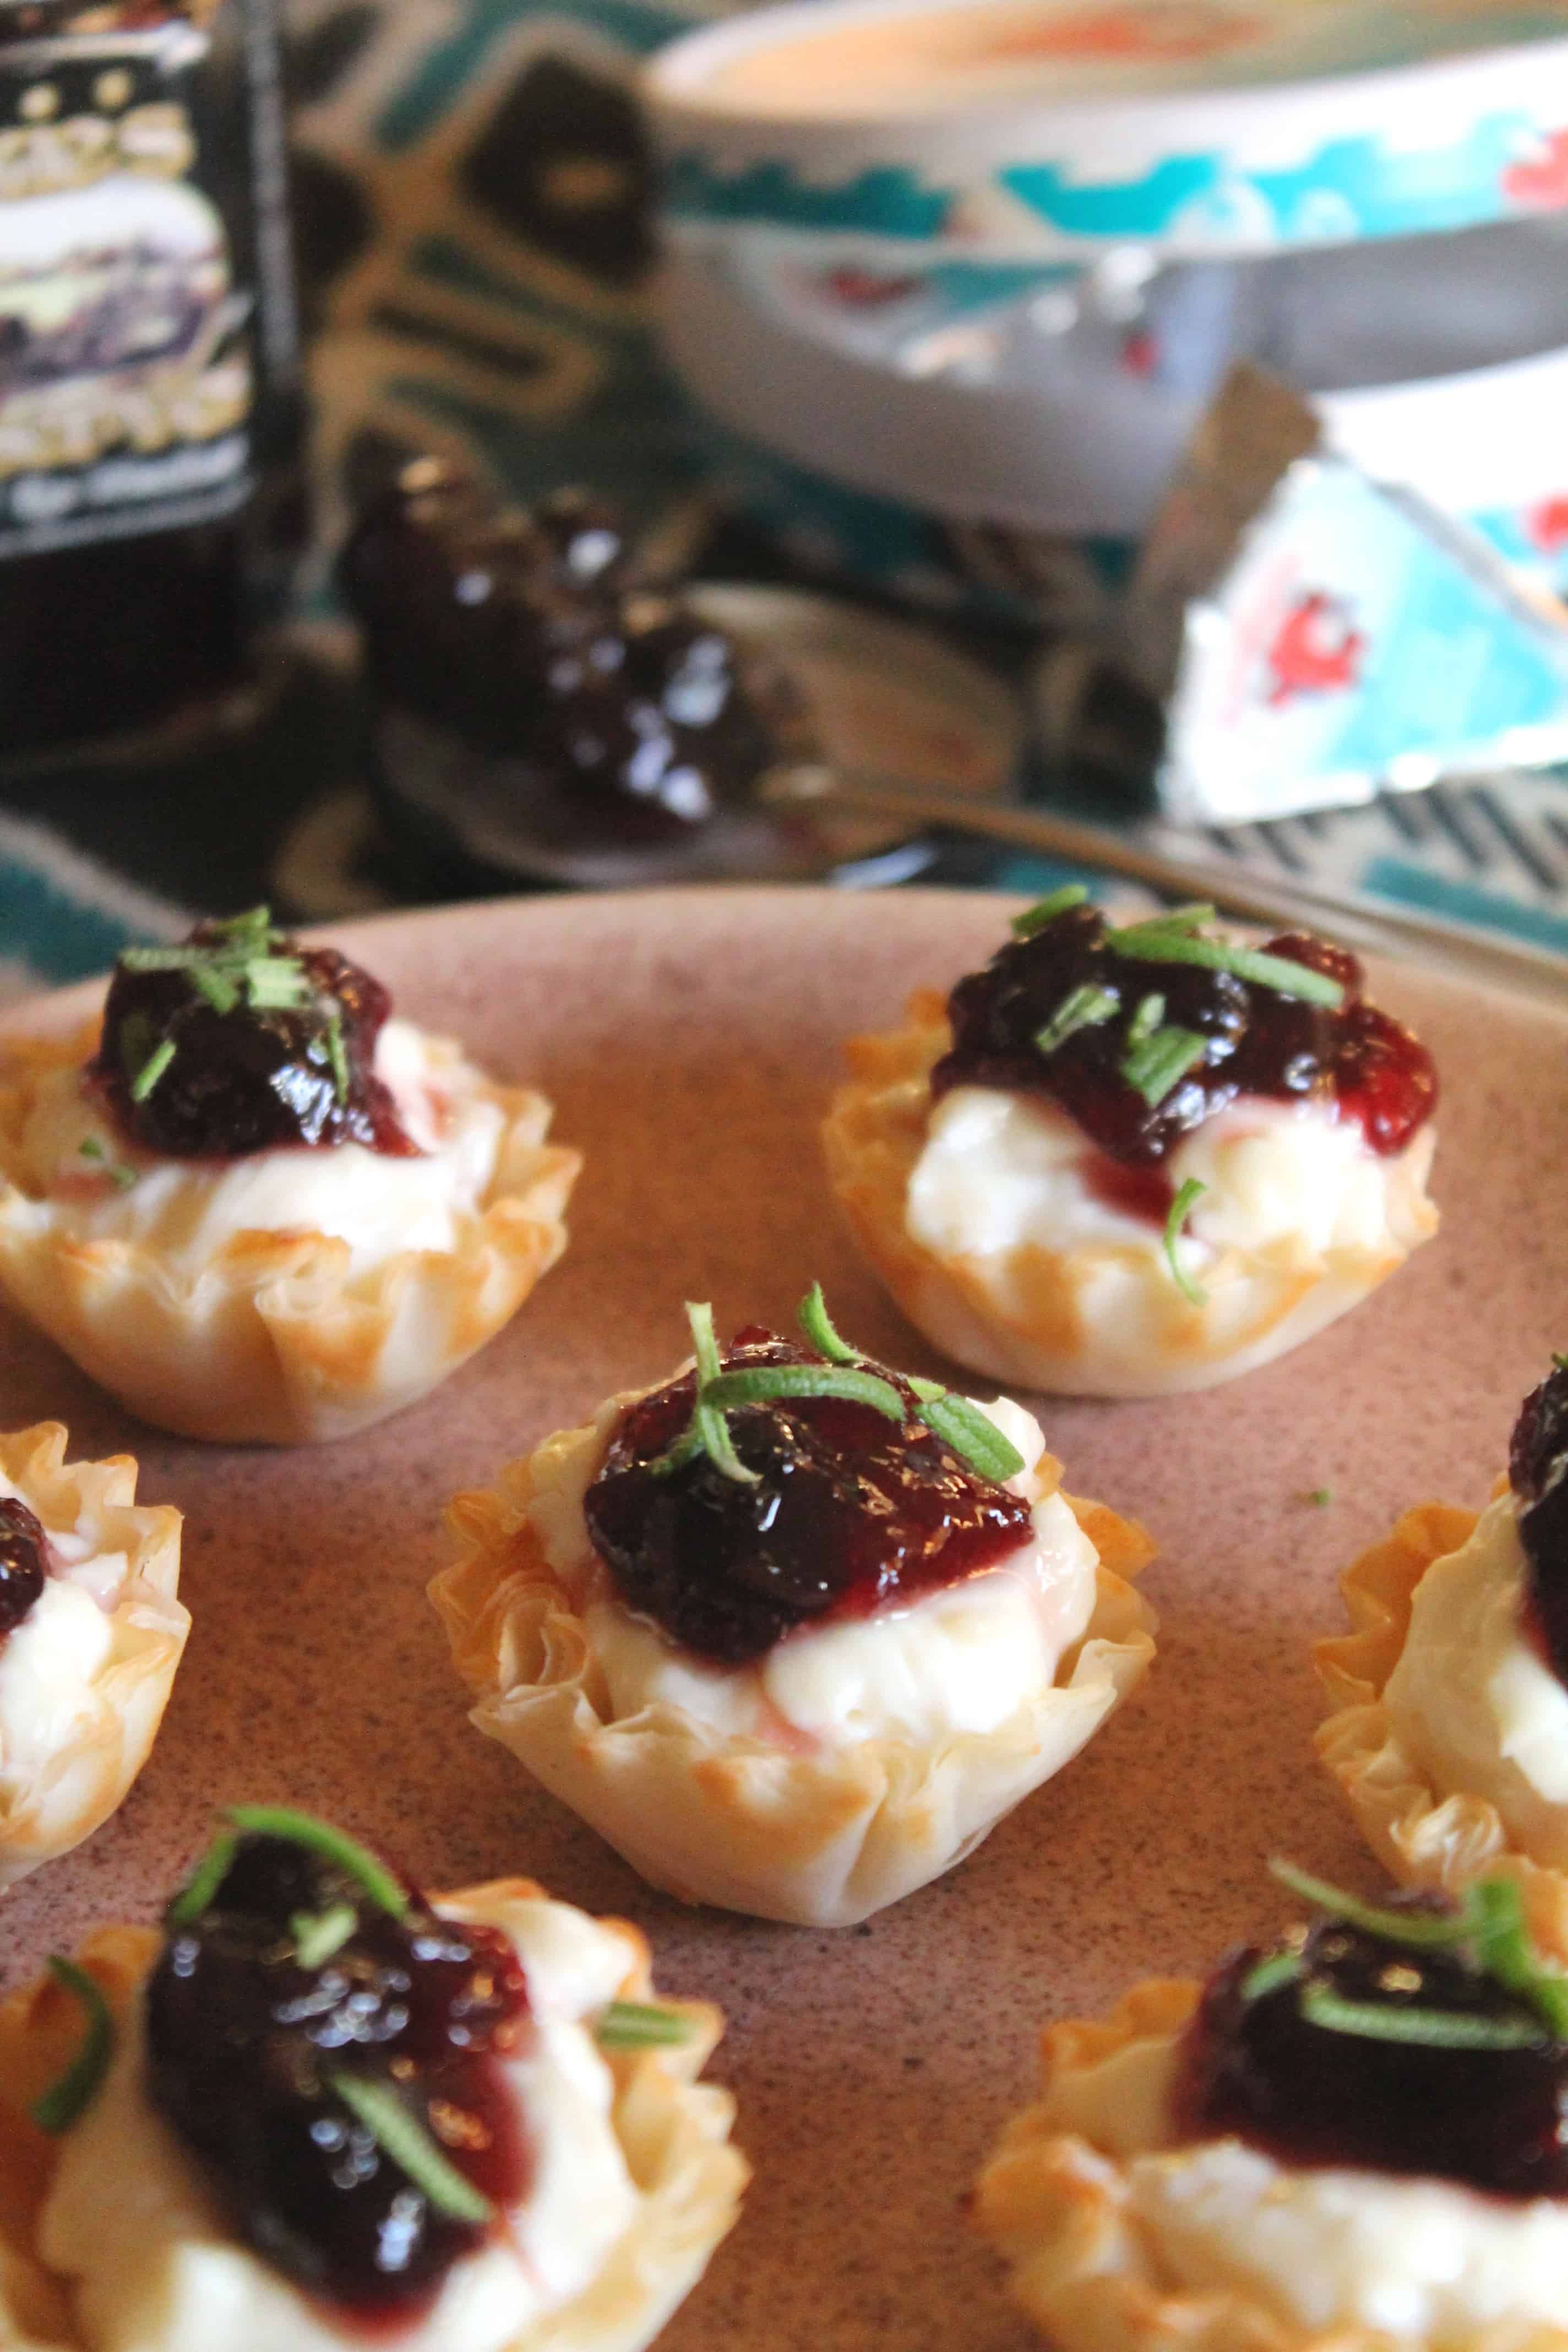 https://www.thespiffycookie.com/wp-content/uploads/2015/12/Baked-Cheese-and-Jam-Phyllo-Cups-1.jpg